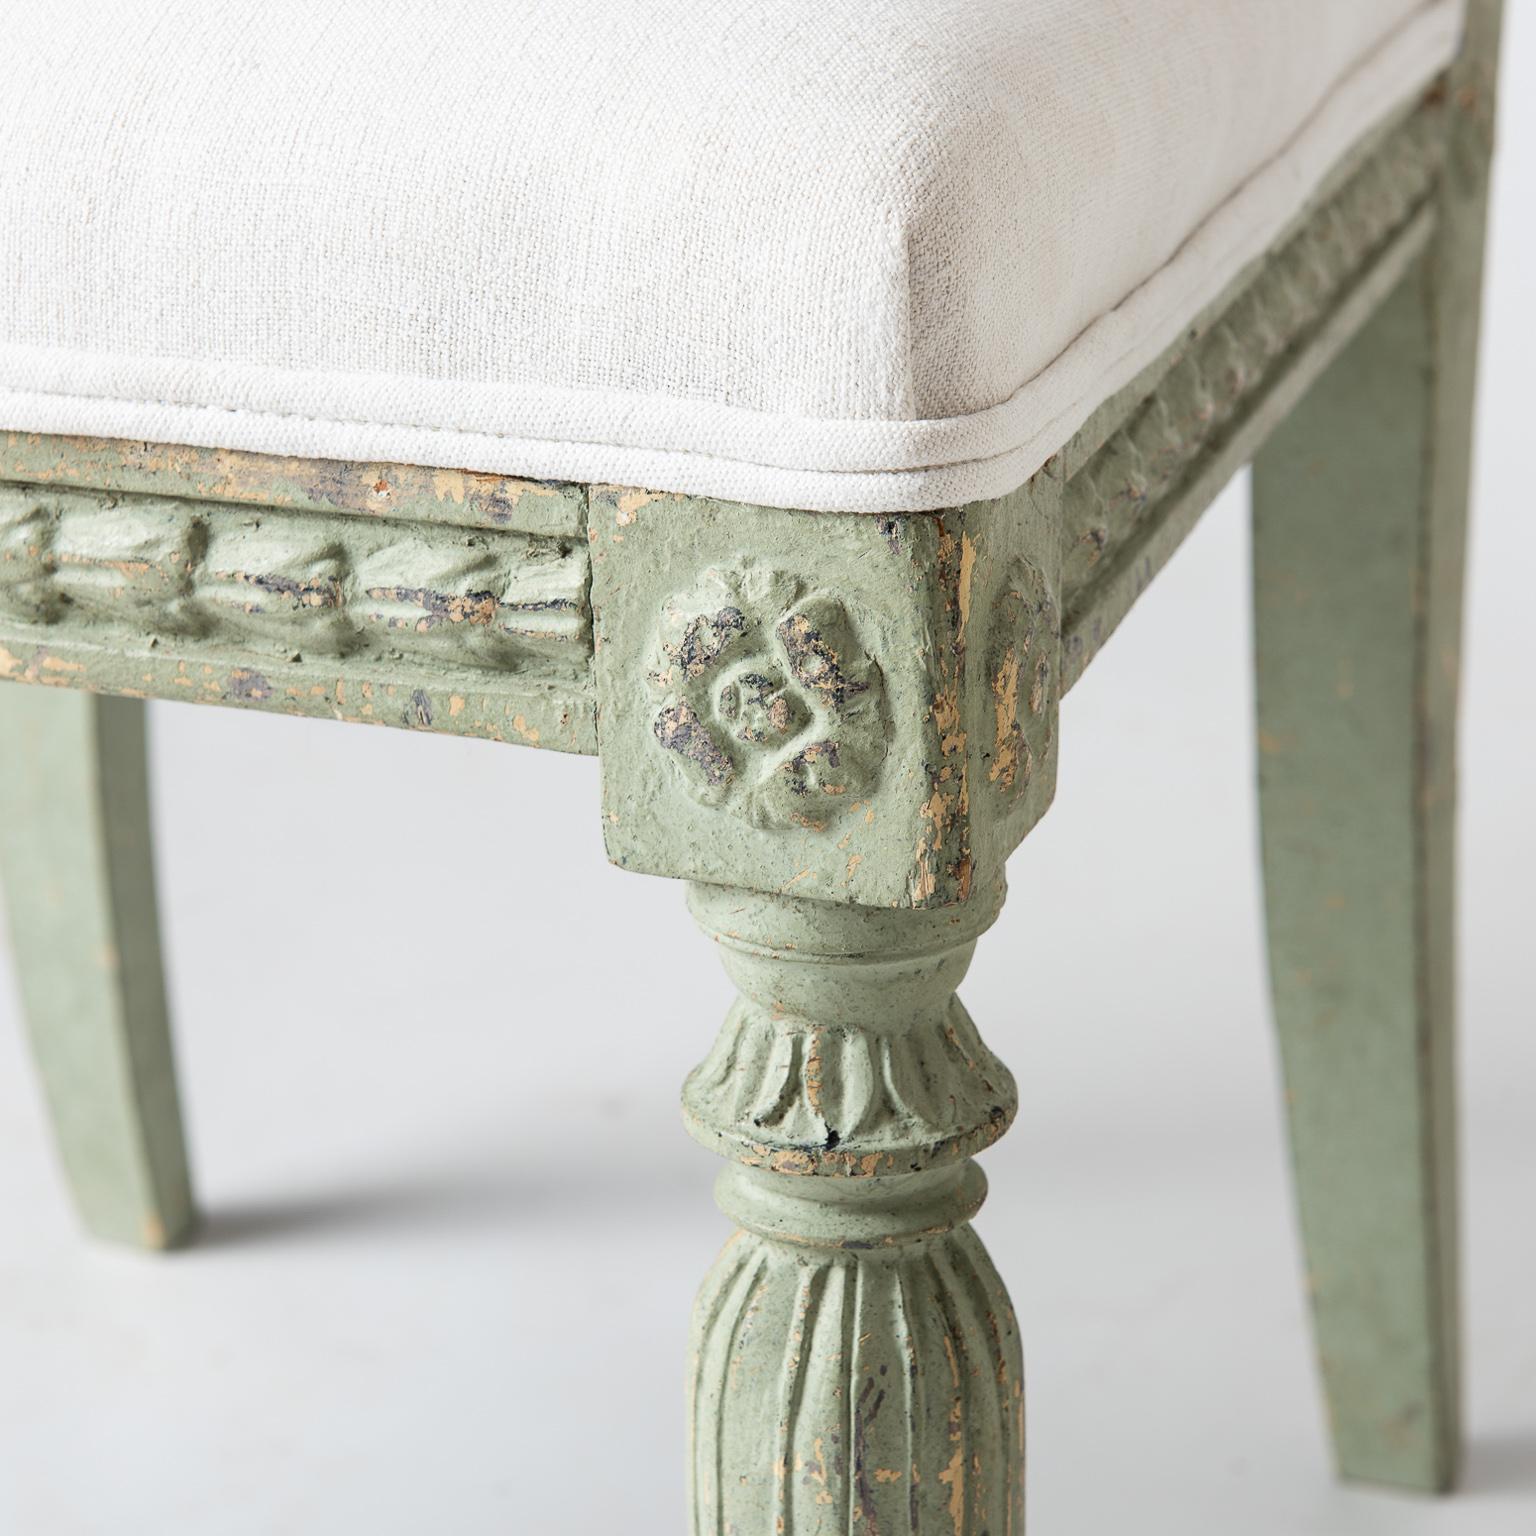 19th Century Pair of Swedish Gustavian Period Side Chairs in Old Green Paint, circa 1800 For Sale